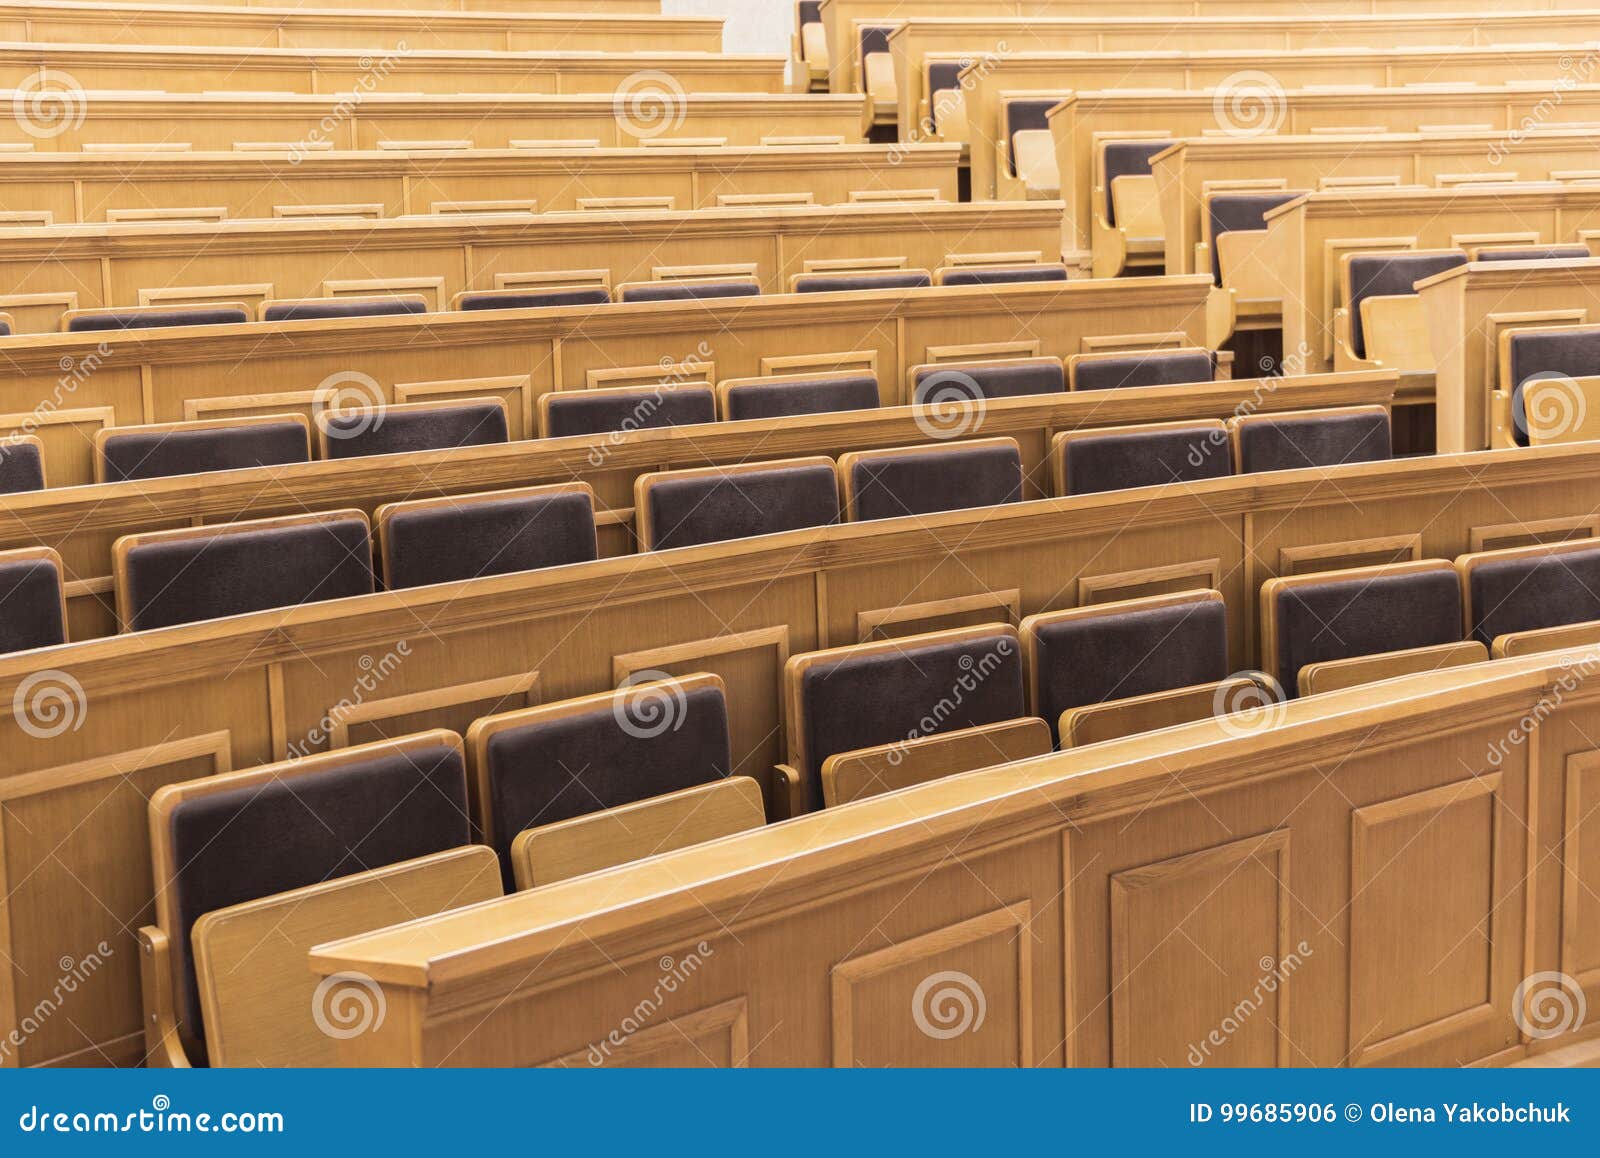 Seats And Tables In Auditory Room At University Stock Photo